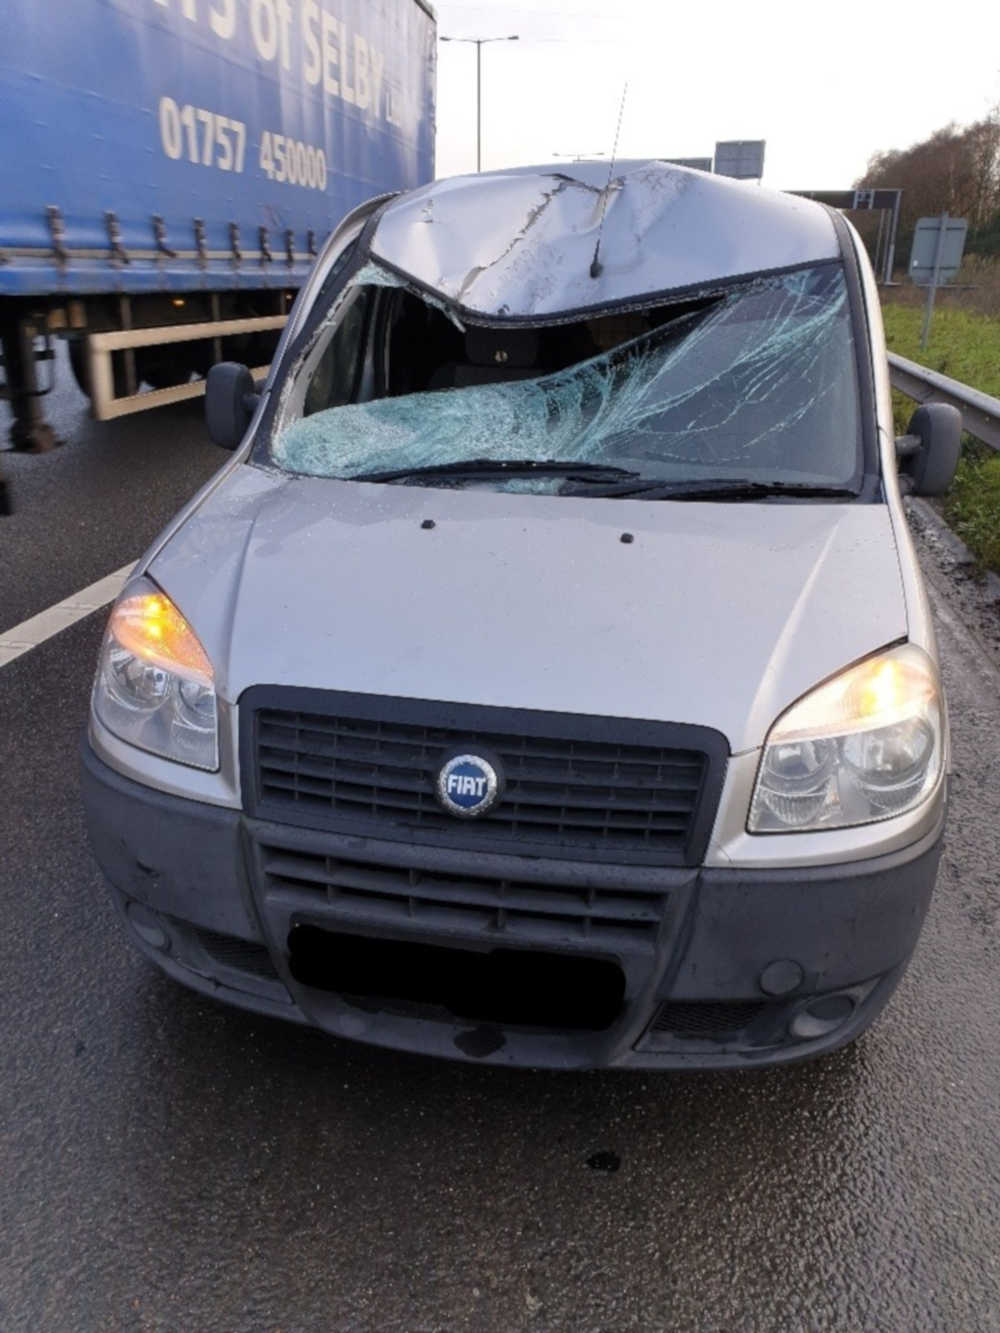 A silver van was crushed by a tyre from a lorry - UK News